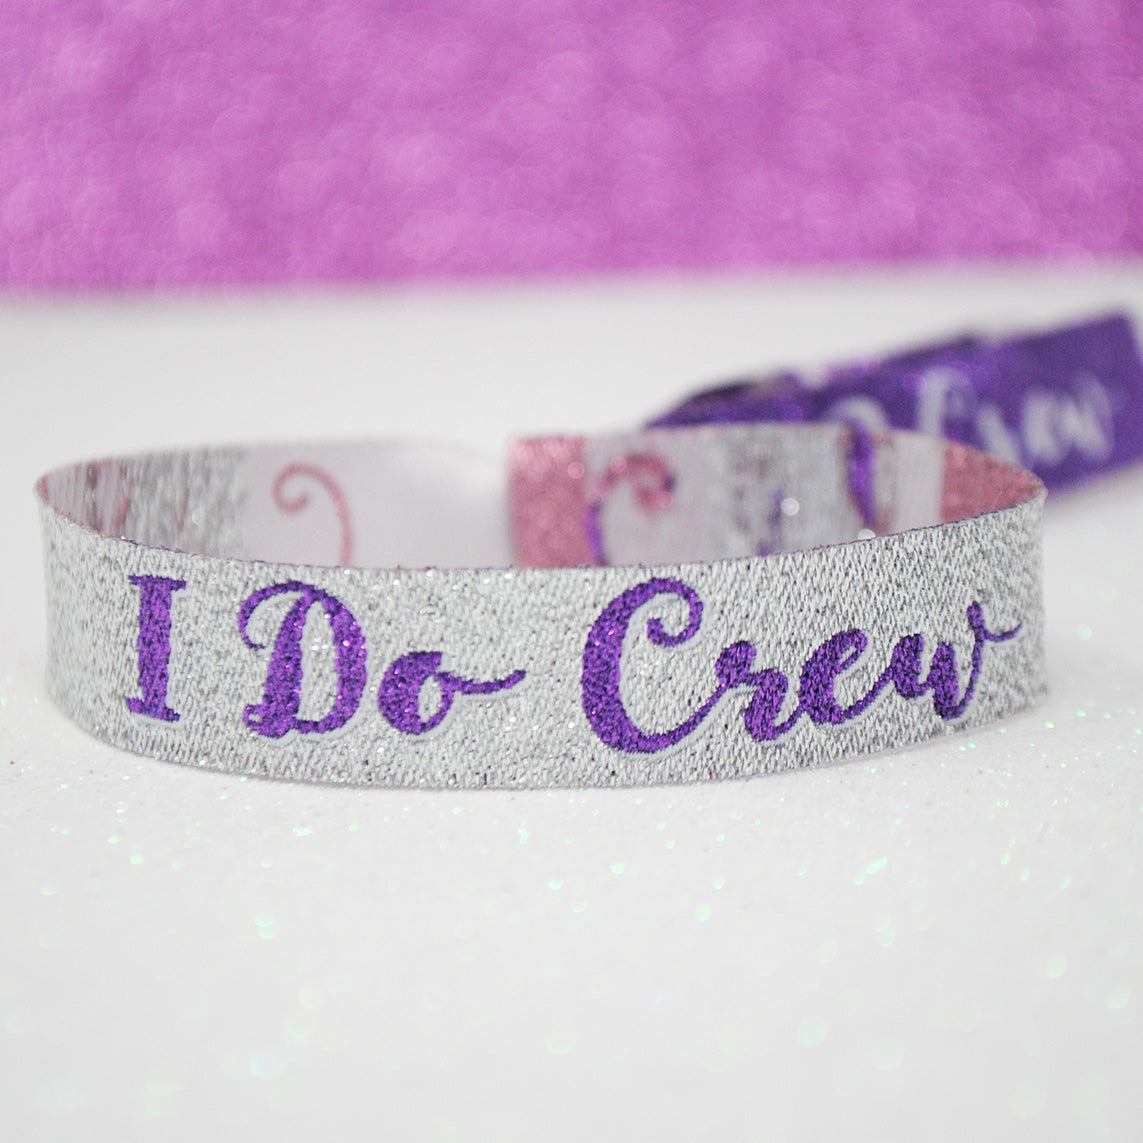 I Do Crew Hen Party Wristbands